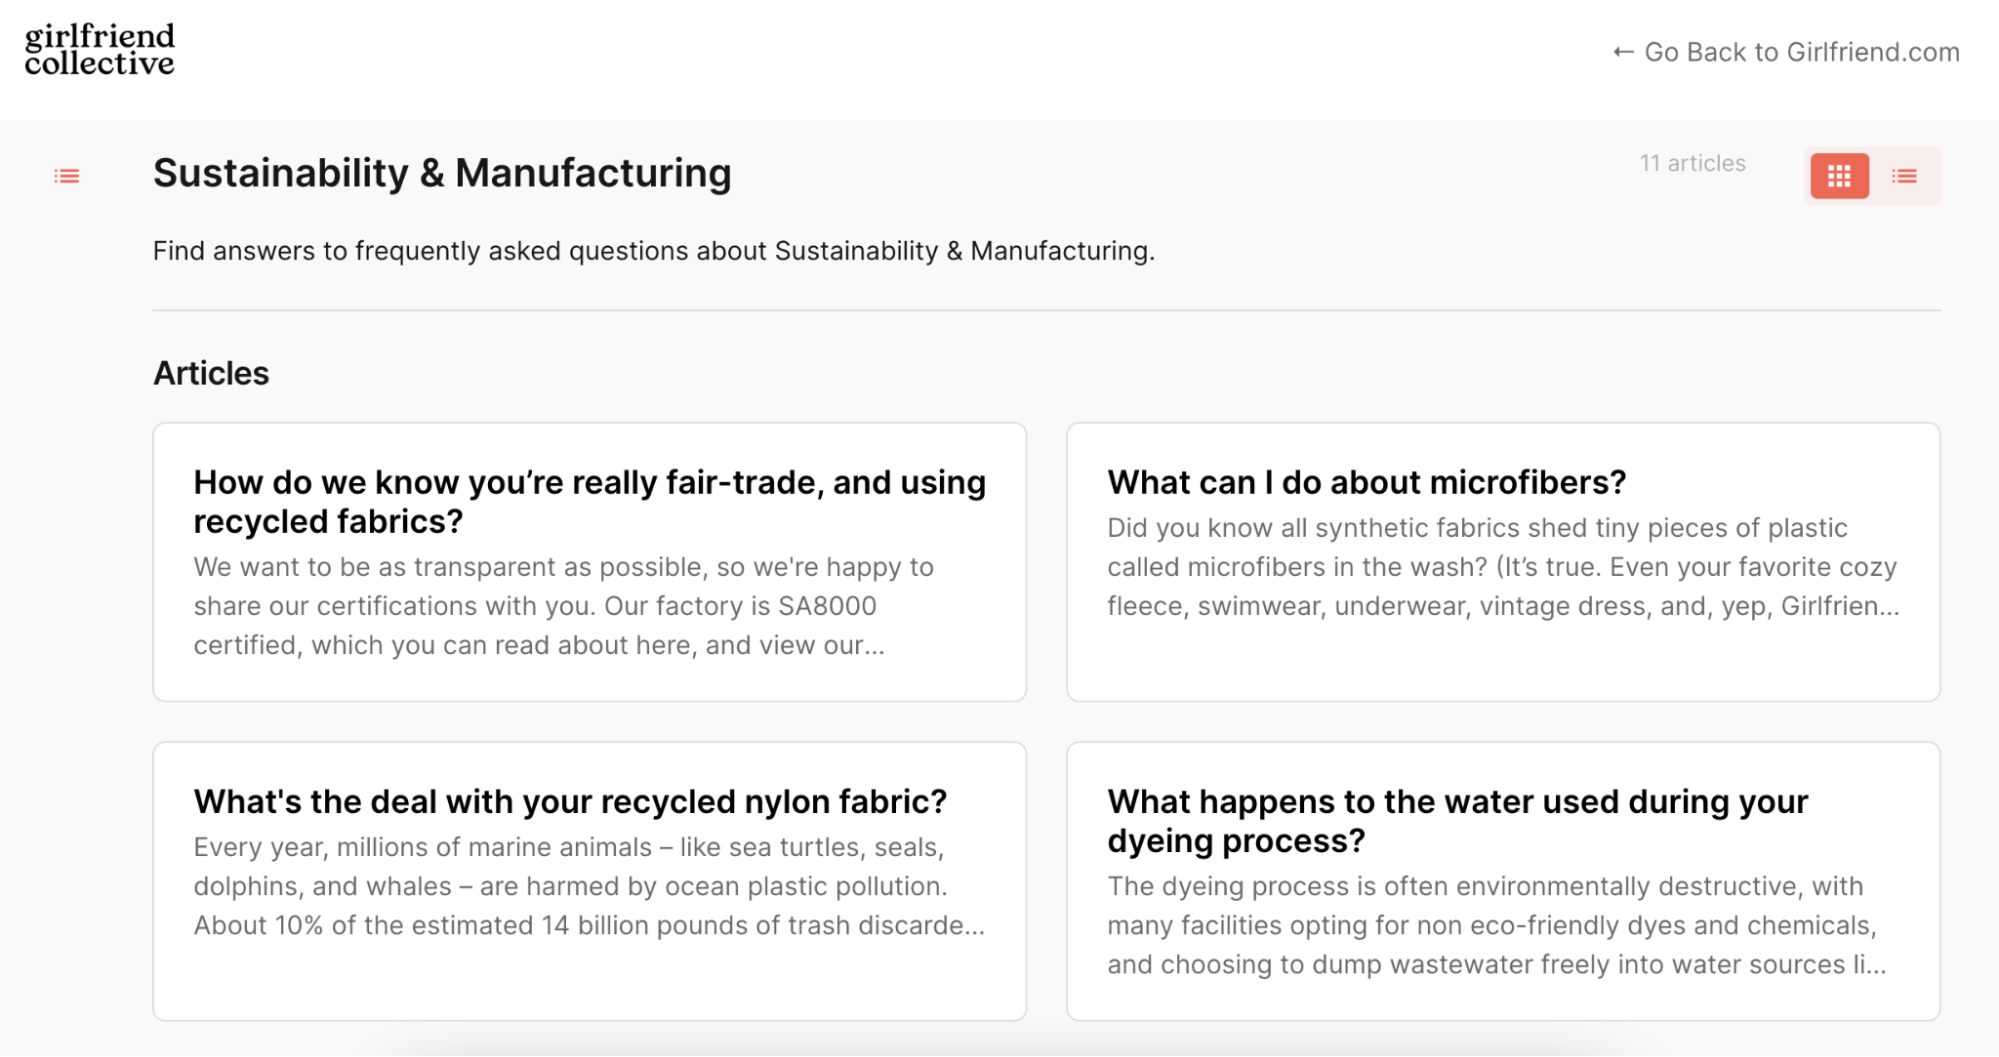 screenshot of Girlfriend Collective website outlining its sustainability practices